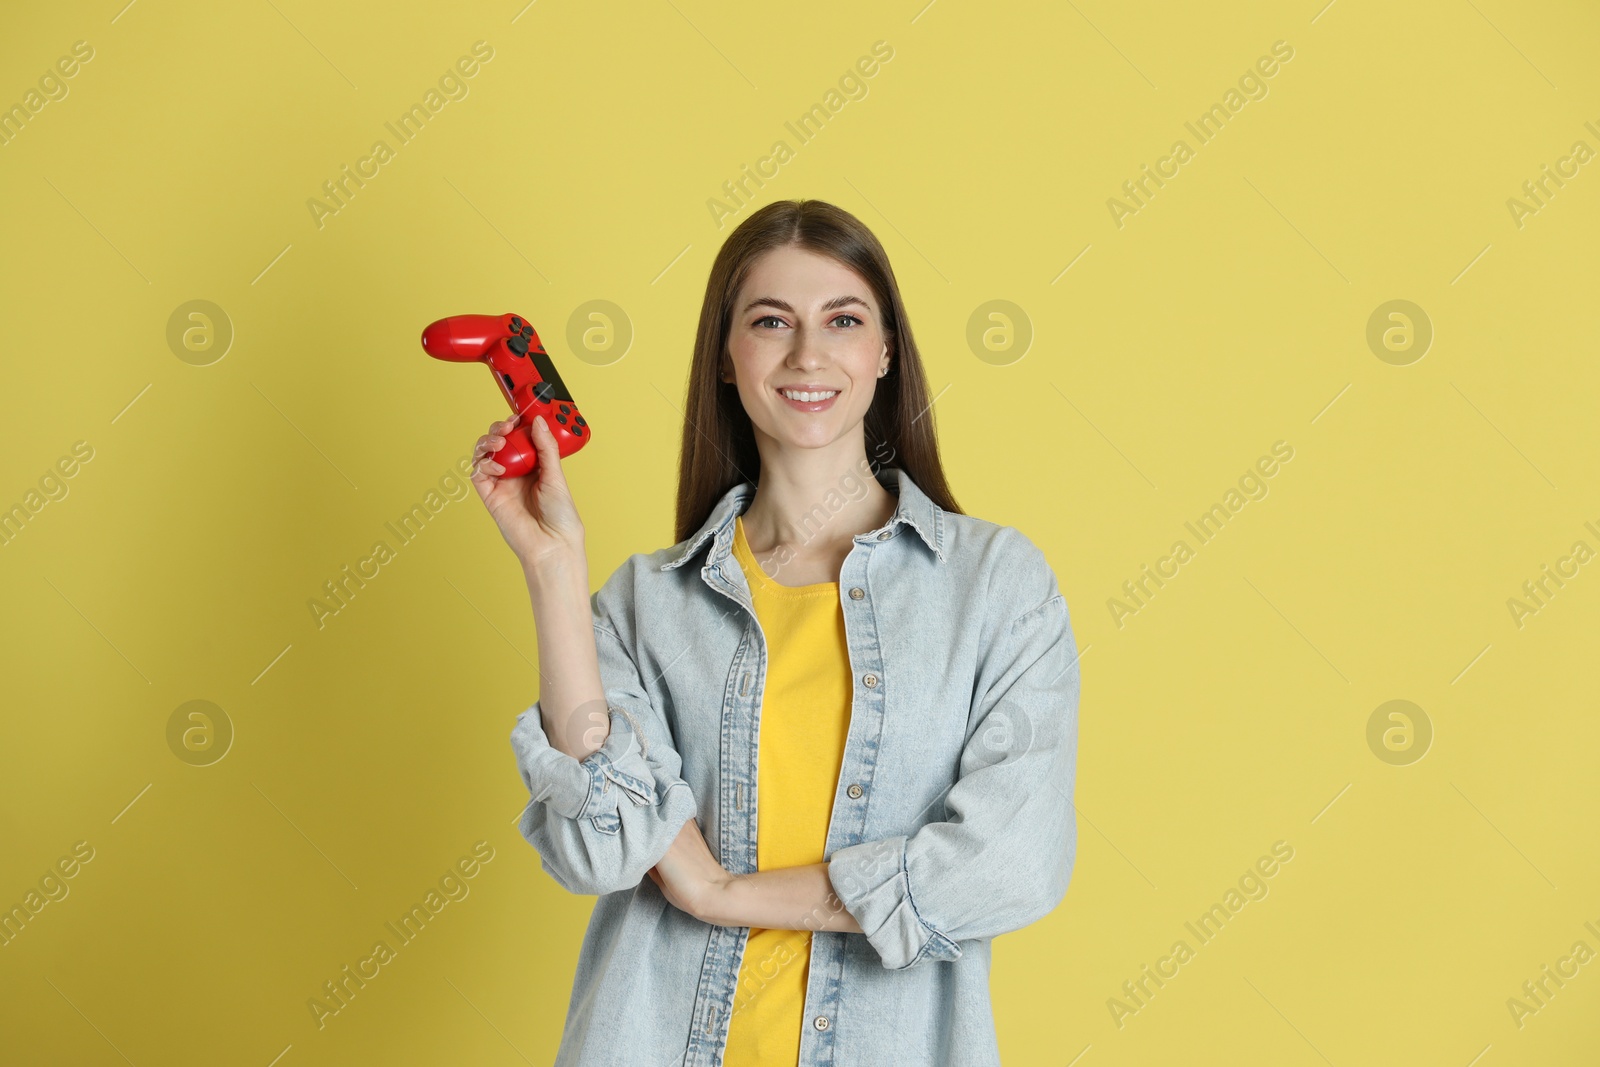 Photo of Happy woman with controller on yellow background